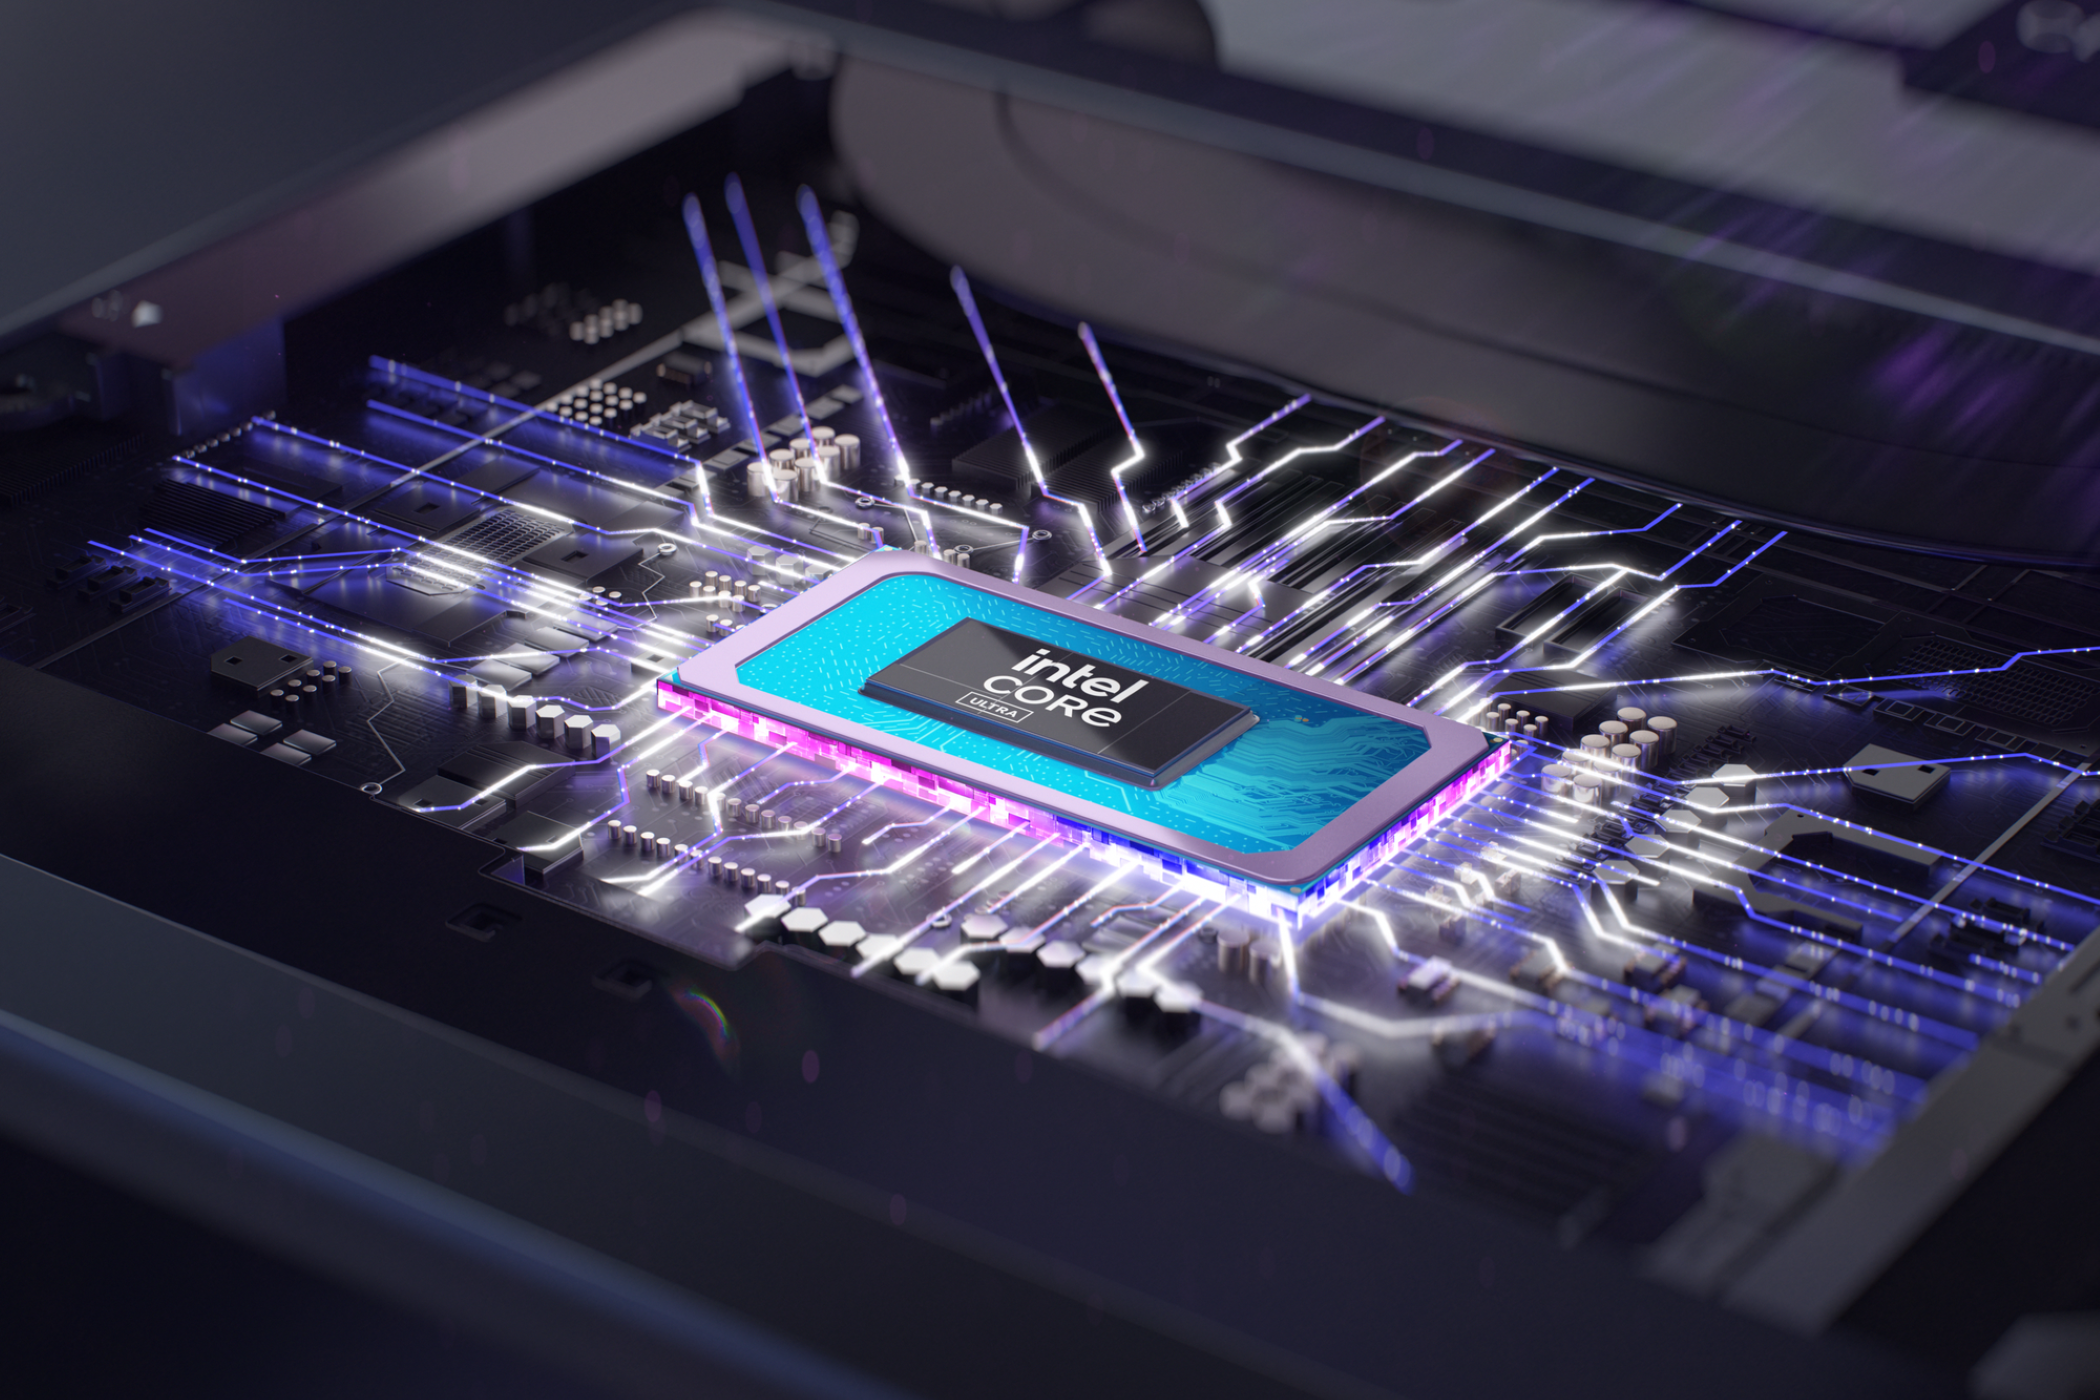 A rendering of an Intel Core Ultra CPU inside of a laptop